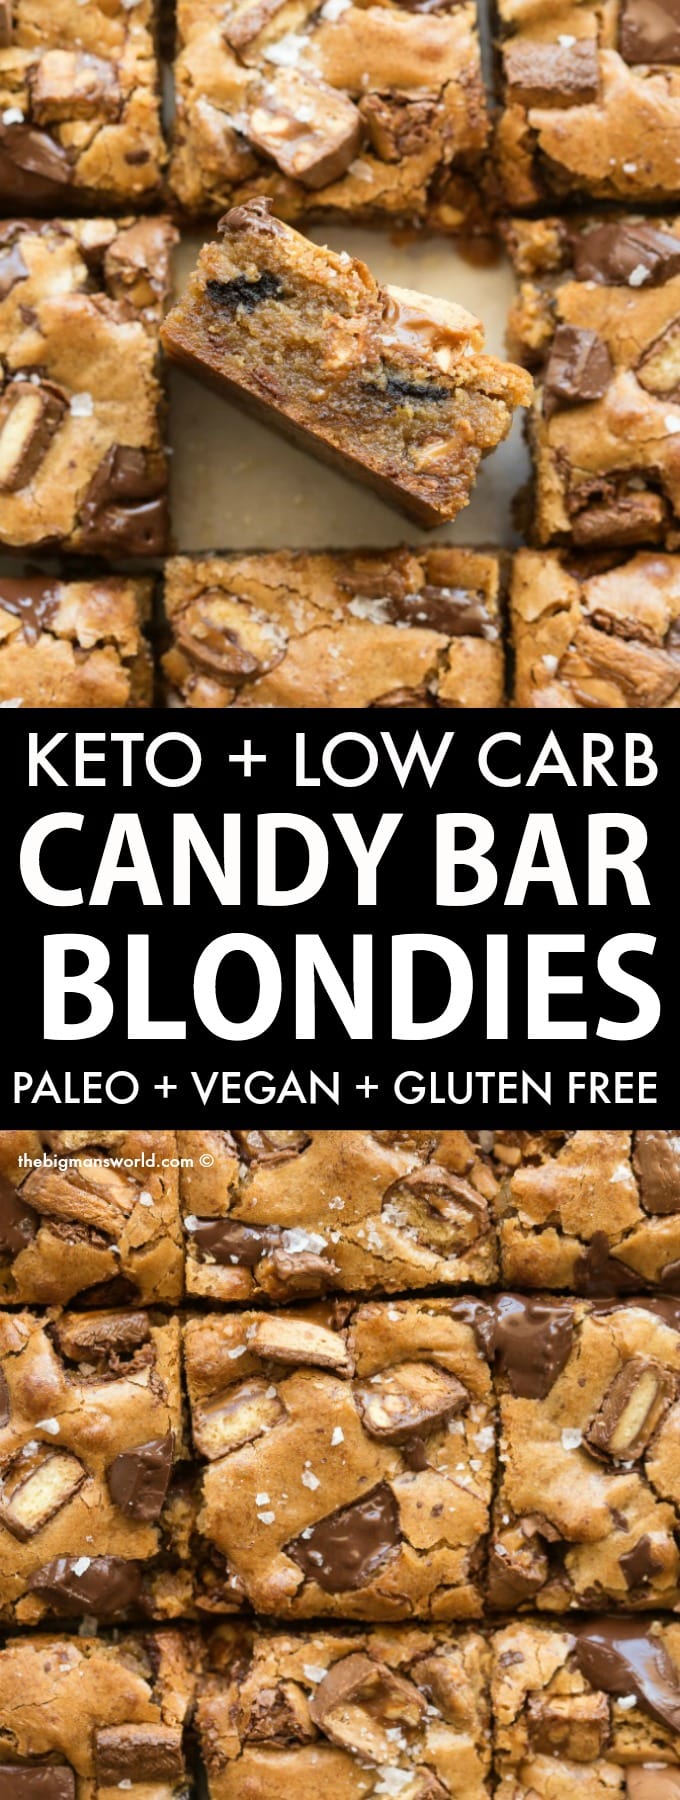 keto blondies with candy bar and chocolate chips